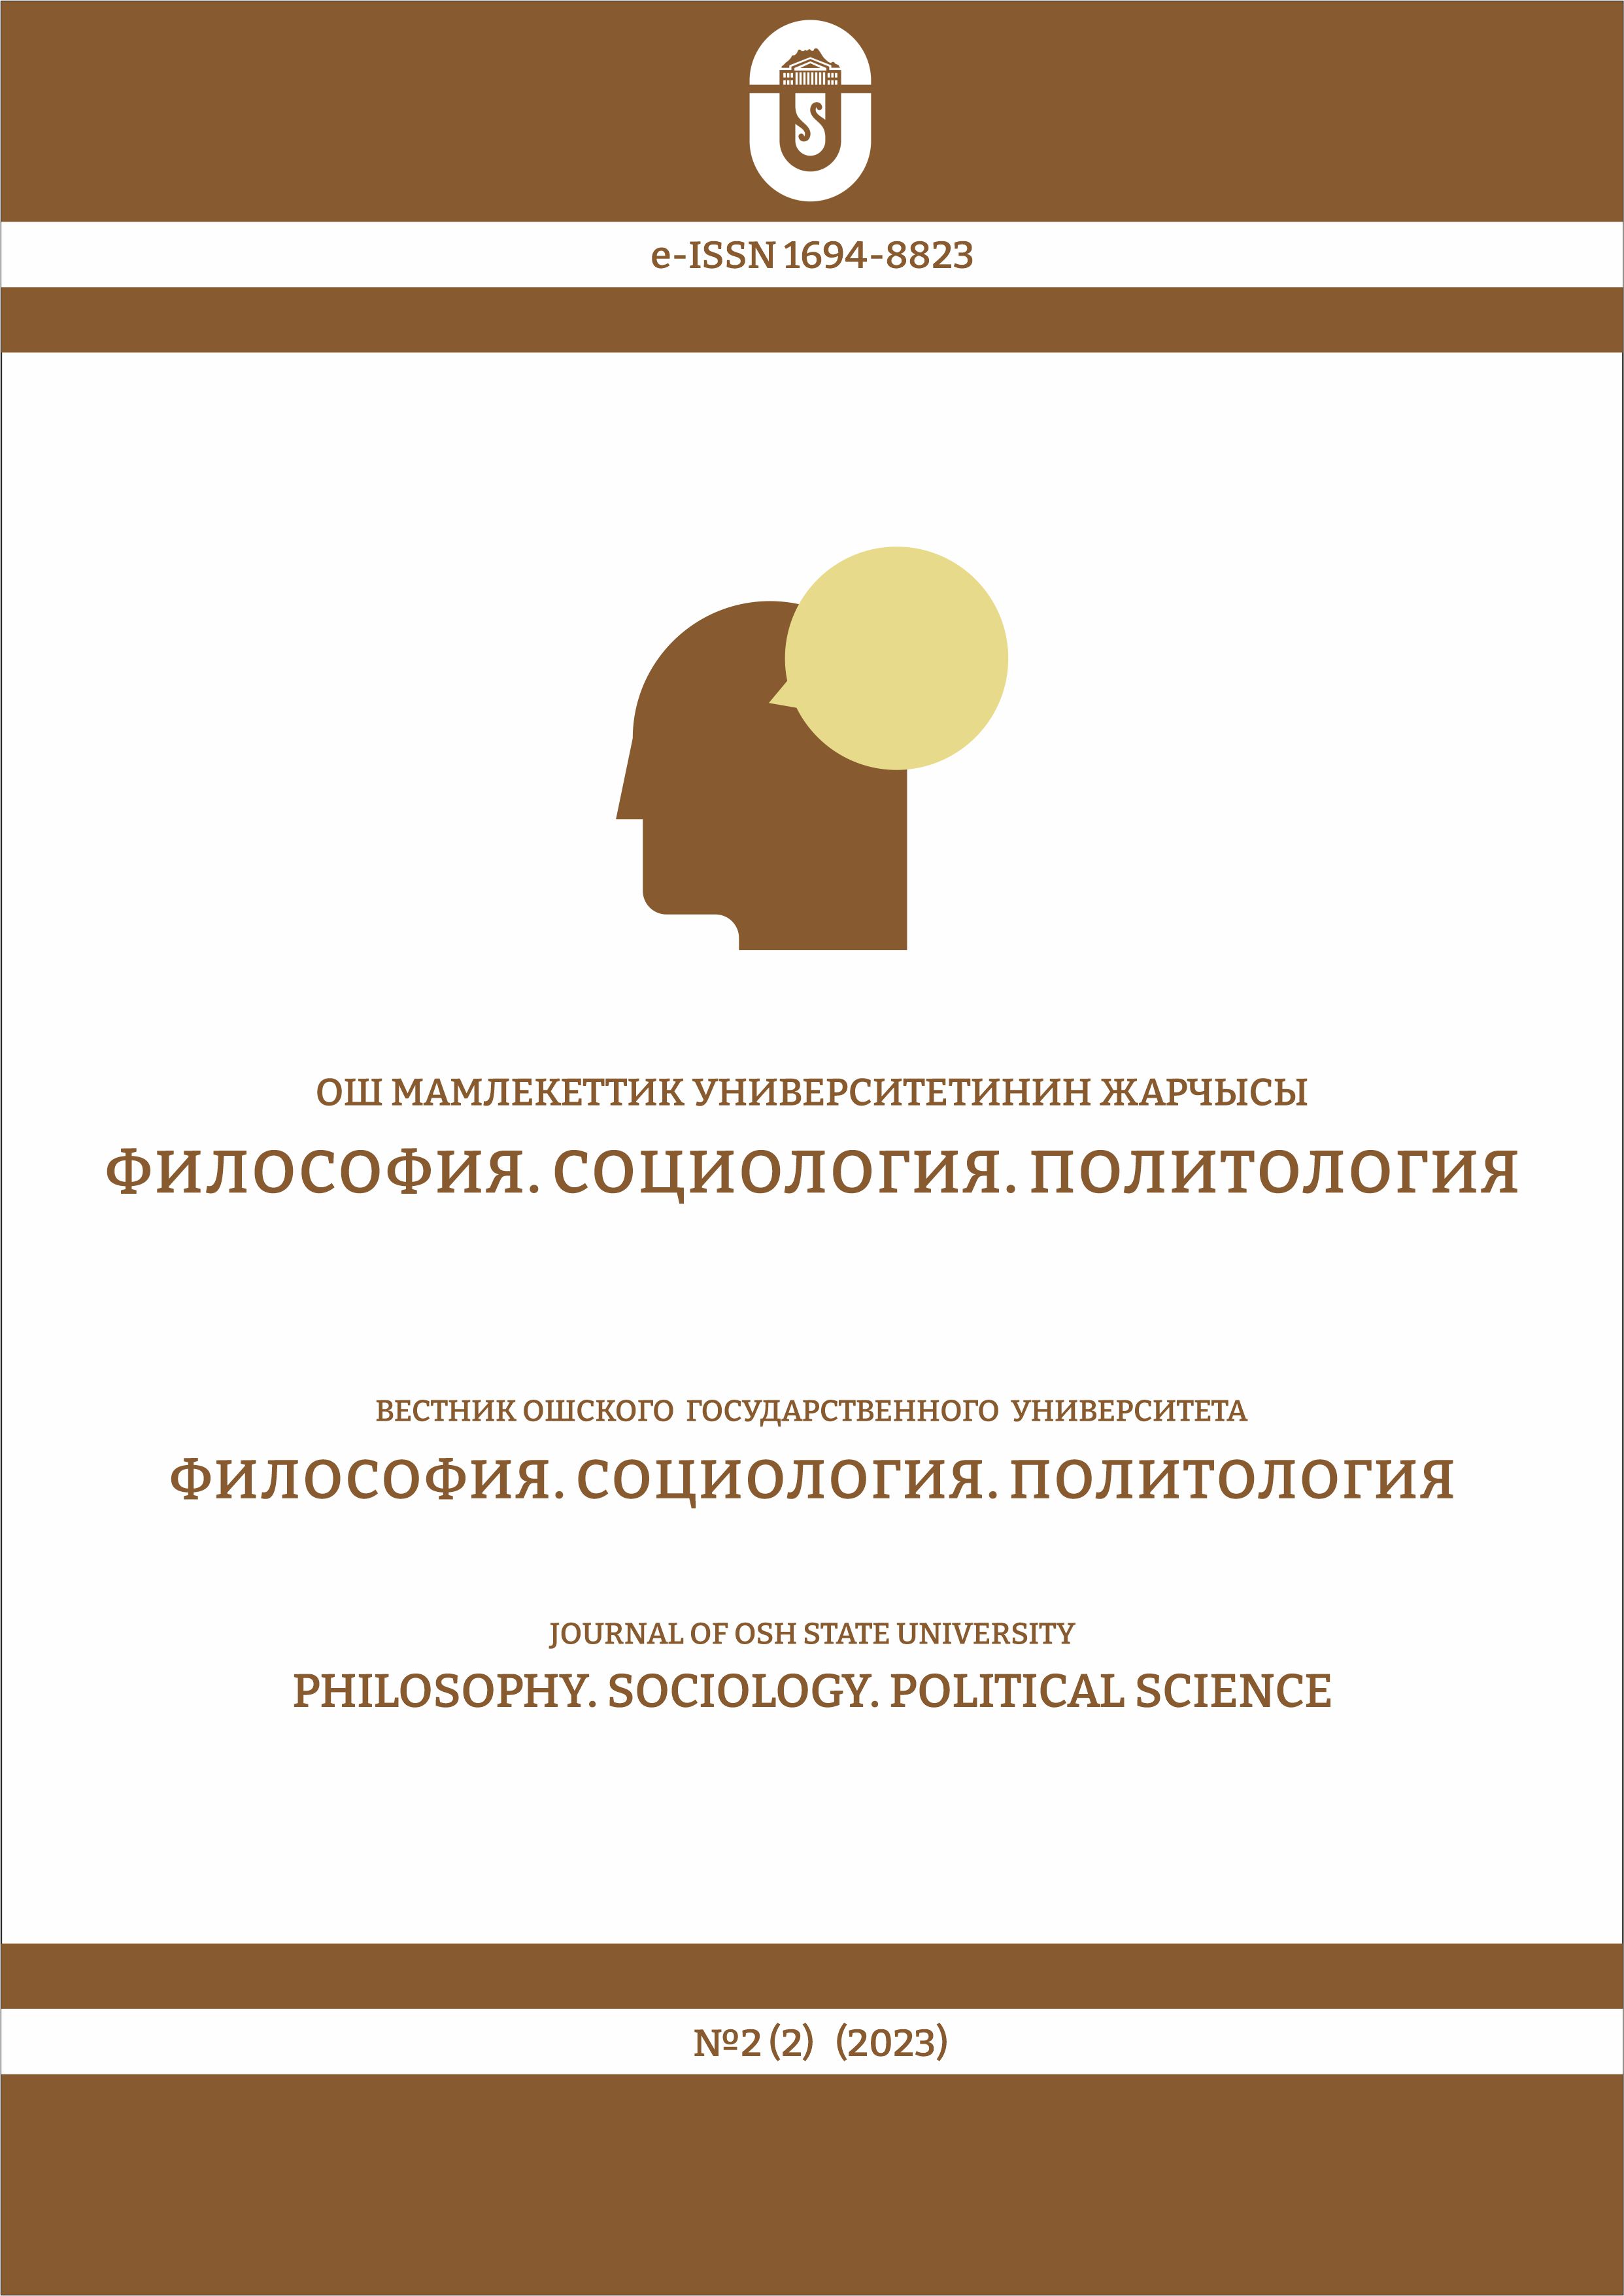 					View No. 2(2) (2023): Journal of Osh State University. Philosophy. Sociology. Political science
				